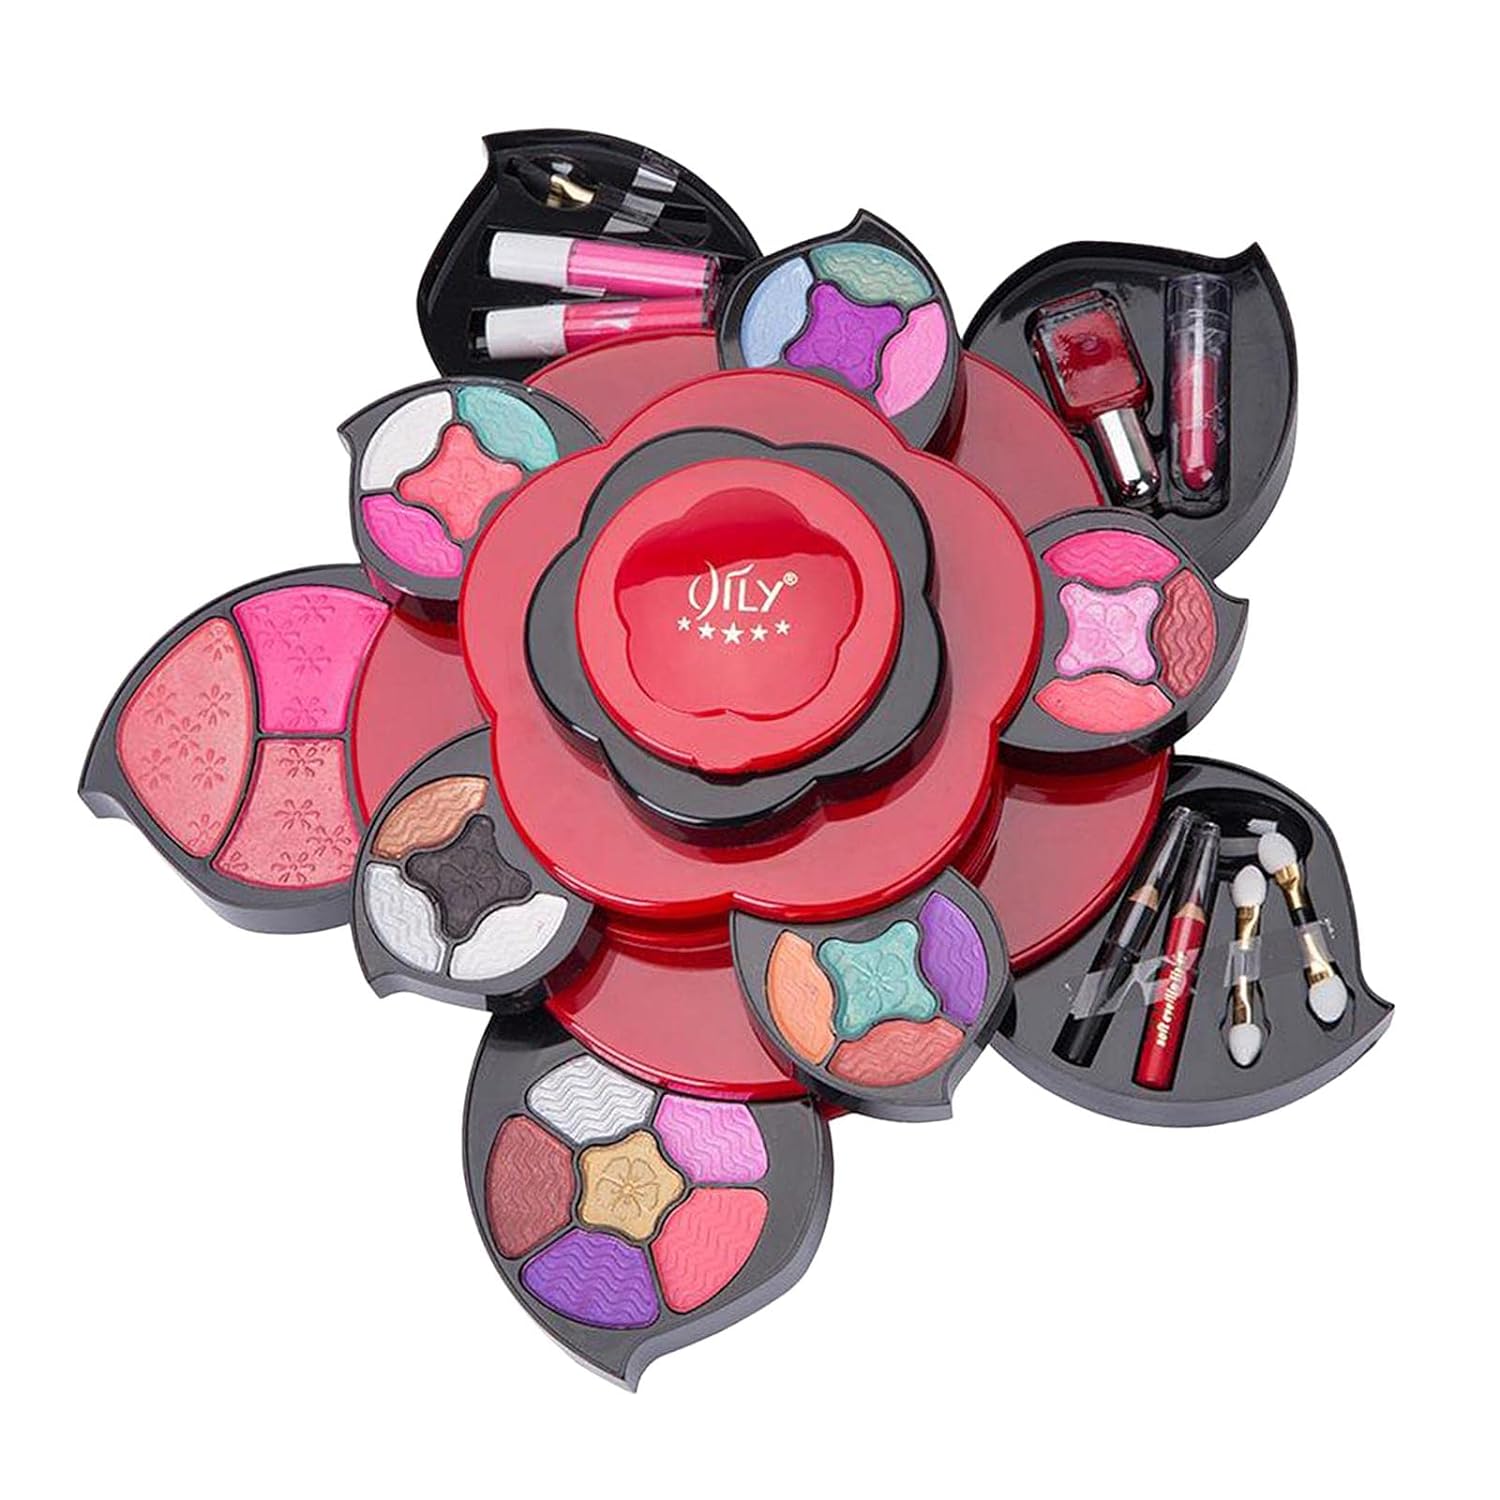 Flower Style Professional Make Up Kit For Women | All In One Beauty Cosmetics Palette